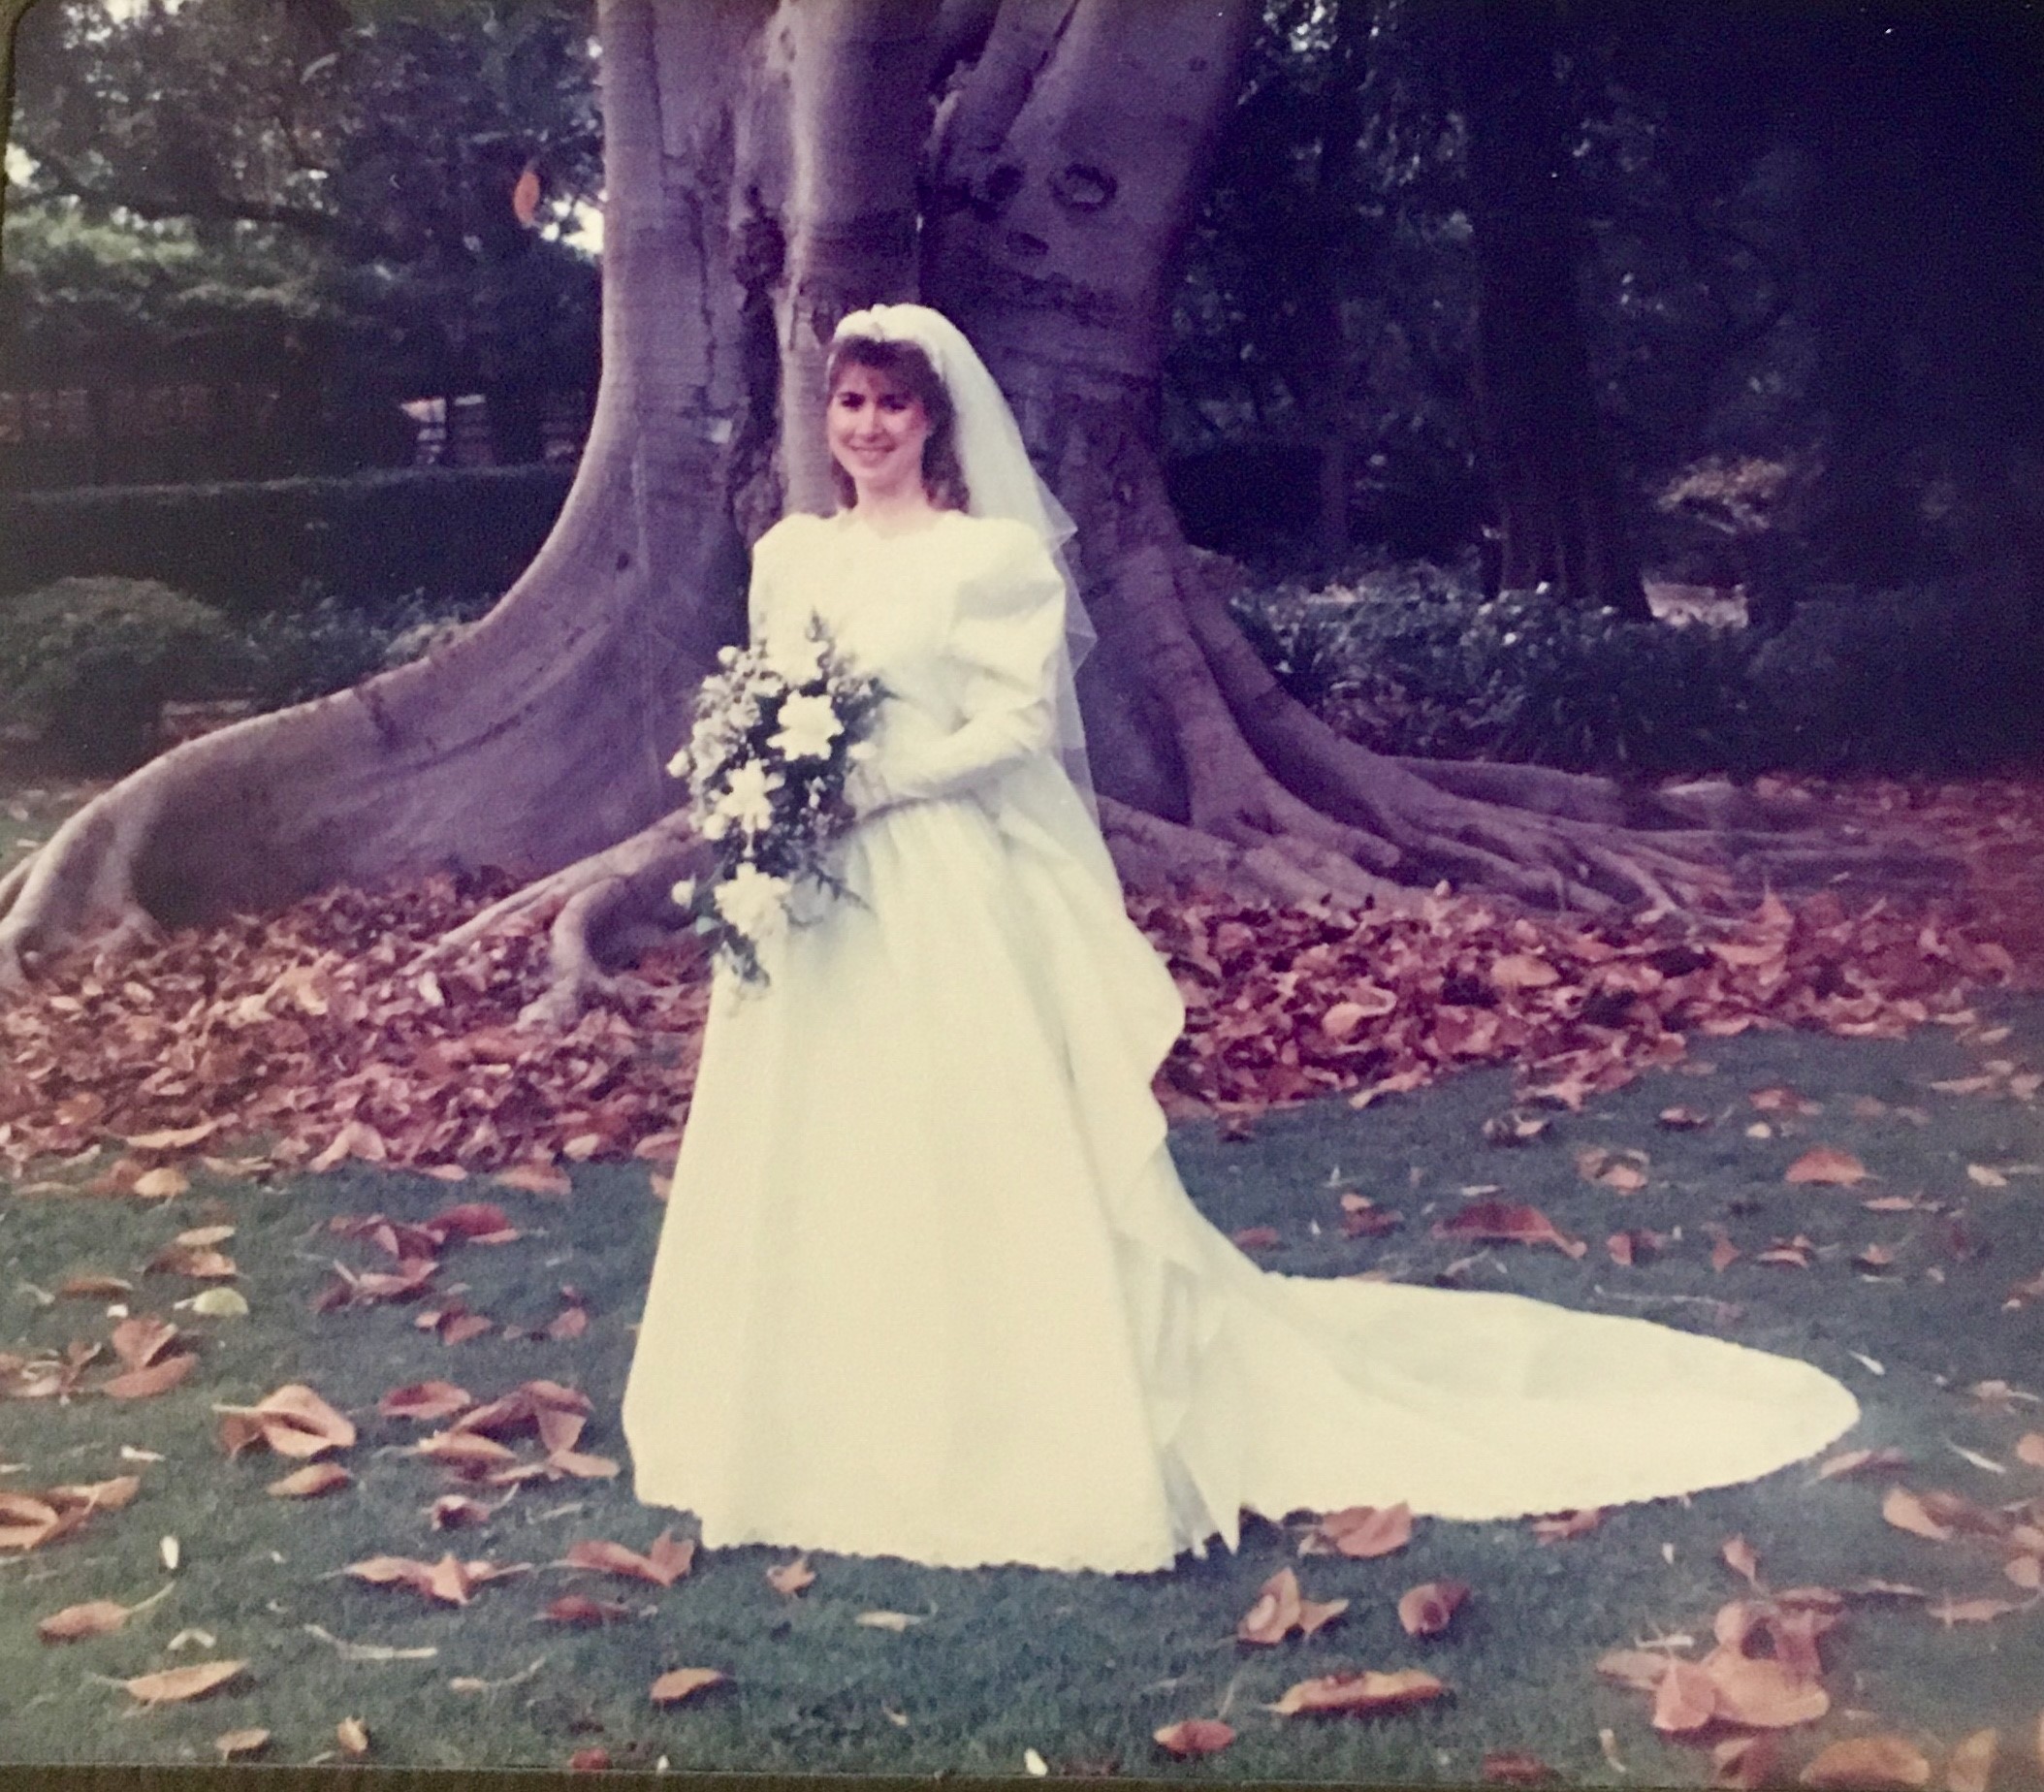 Kirsten Dominguez reminisces about her wedding day 30 years ago today (June 3, 1989) in honor of RLC's 175th anniversary in 2019.